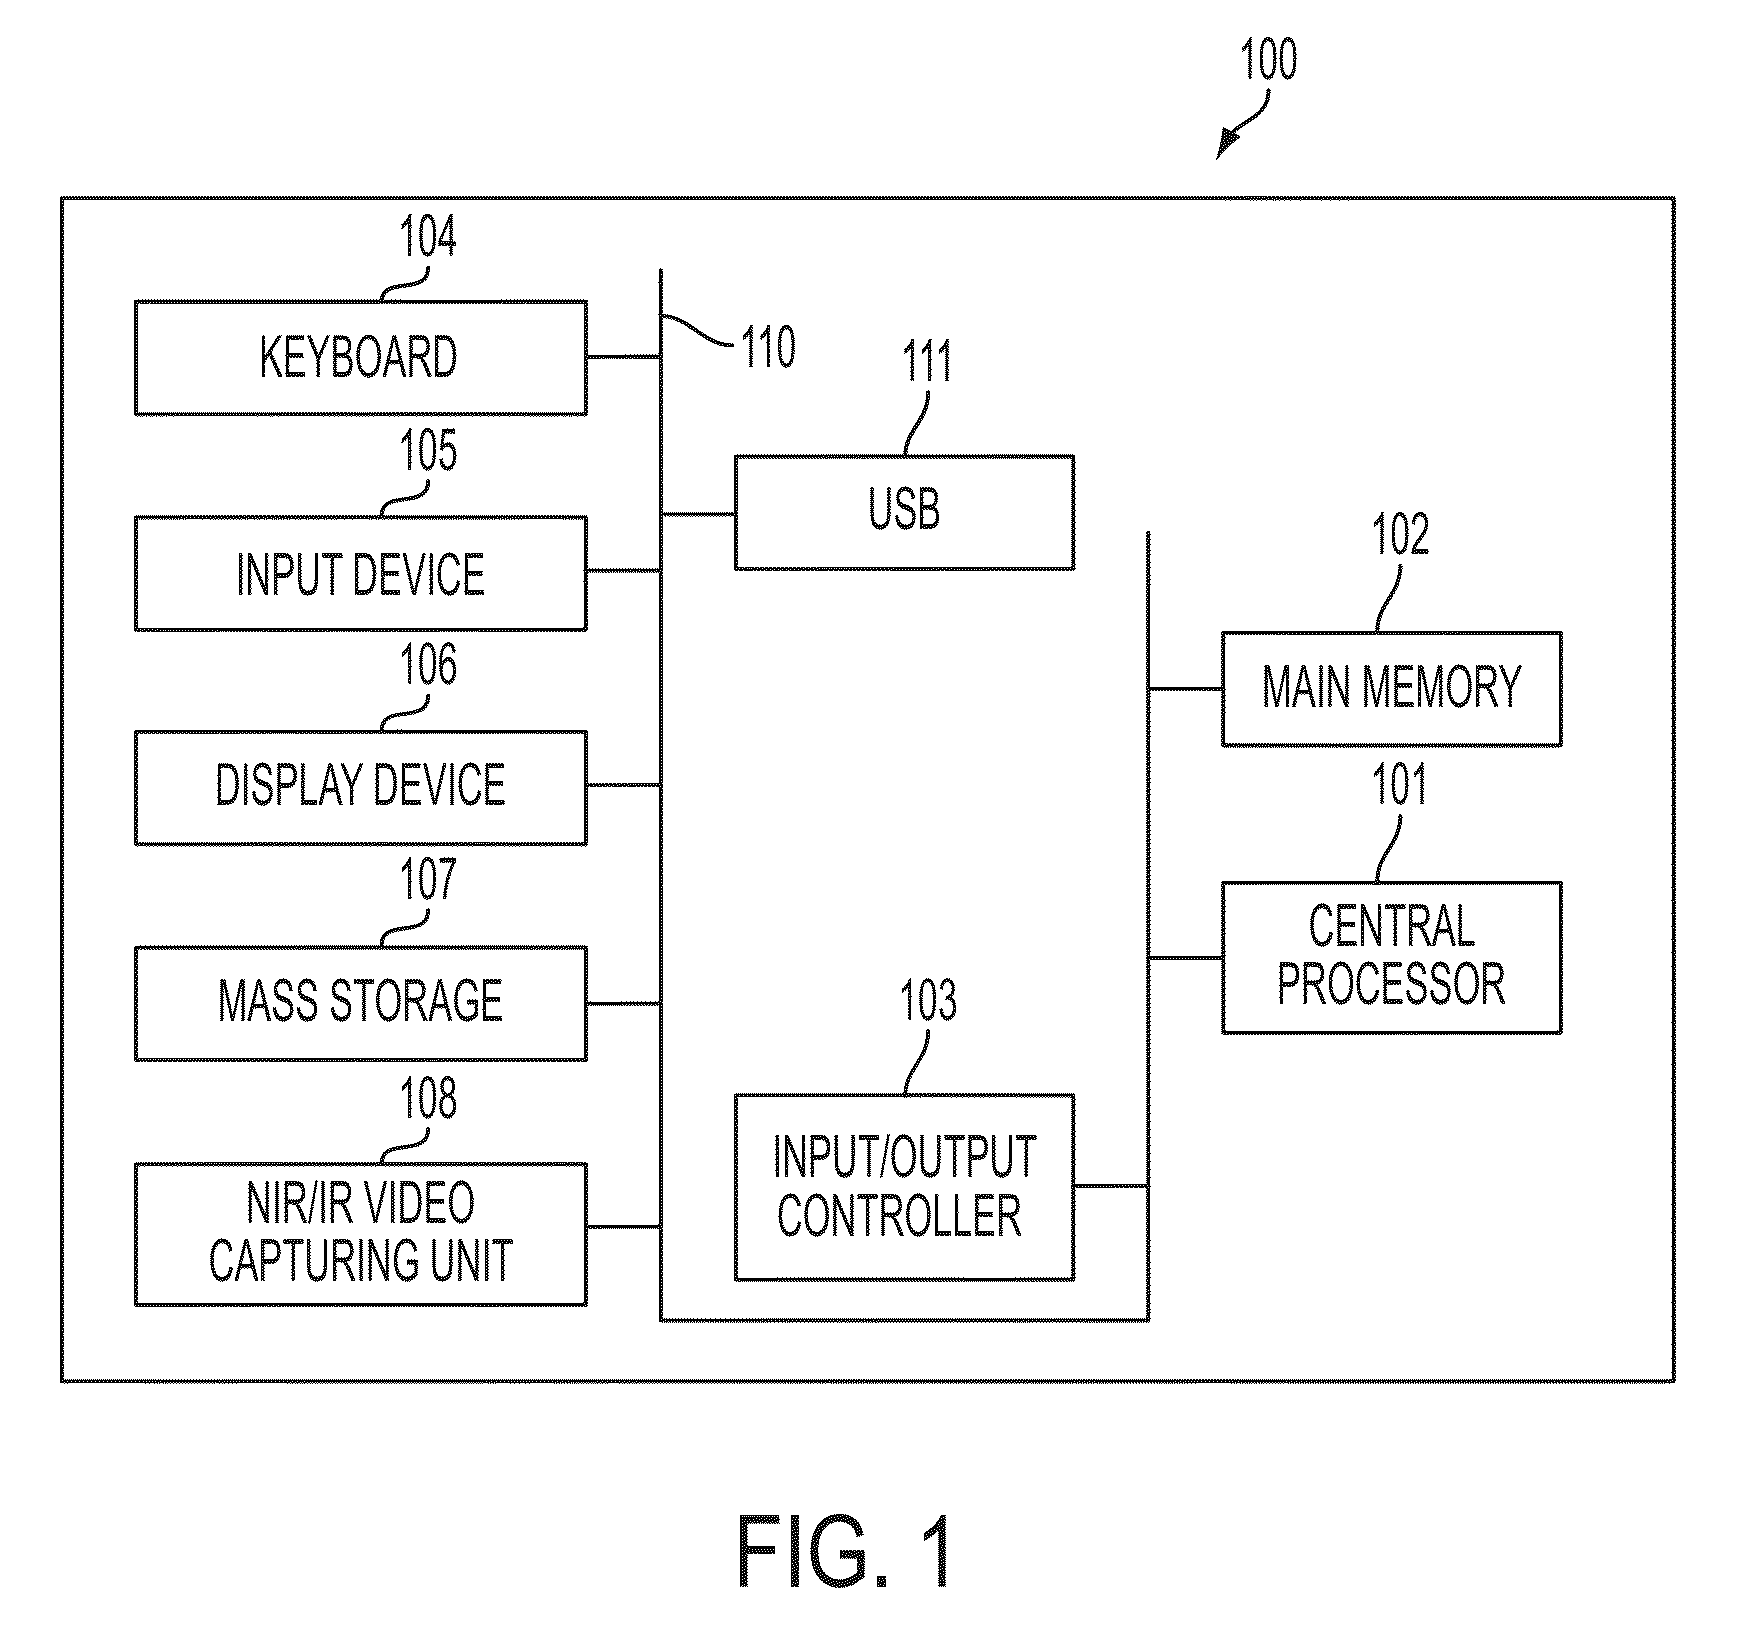 Automated method and system for detecting the presence of a lit cigarette